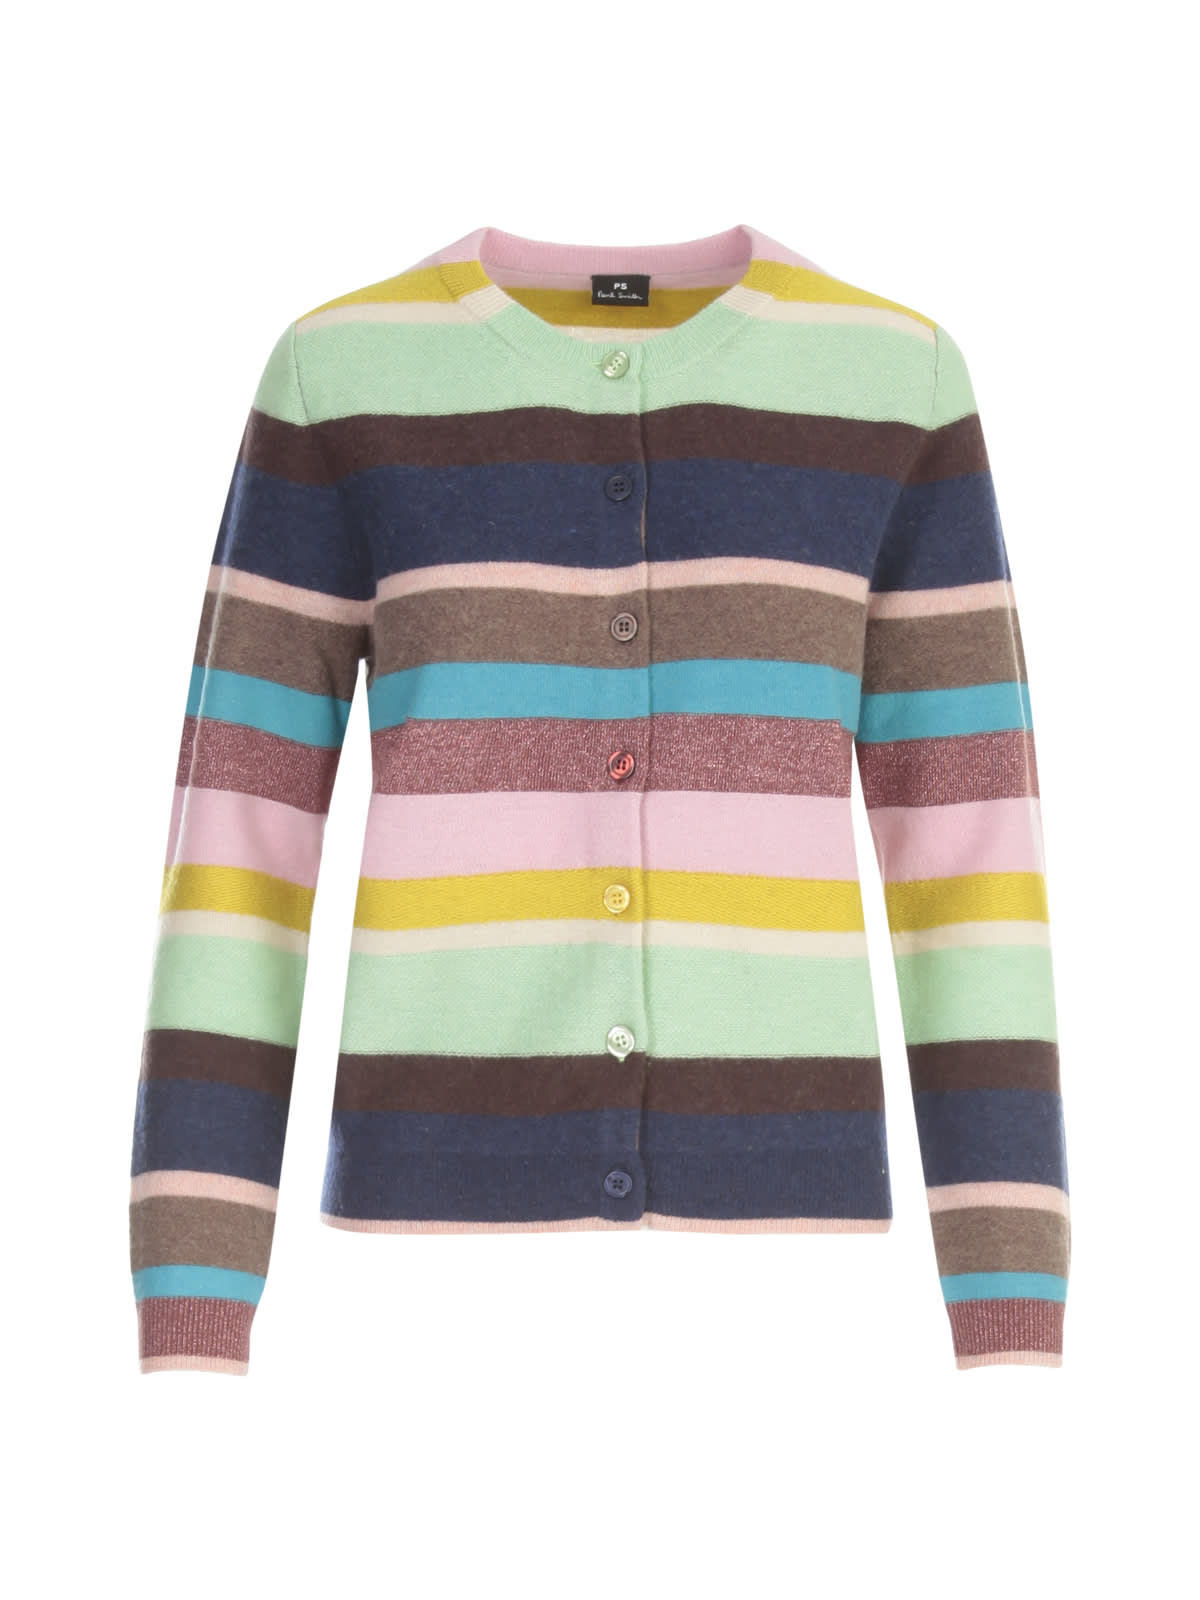 PS by Paul Smith Striped Cardigan